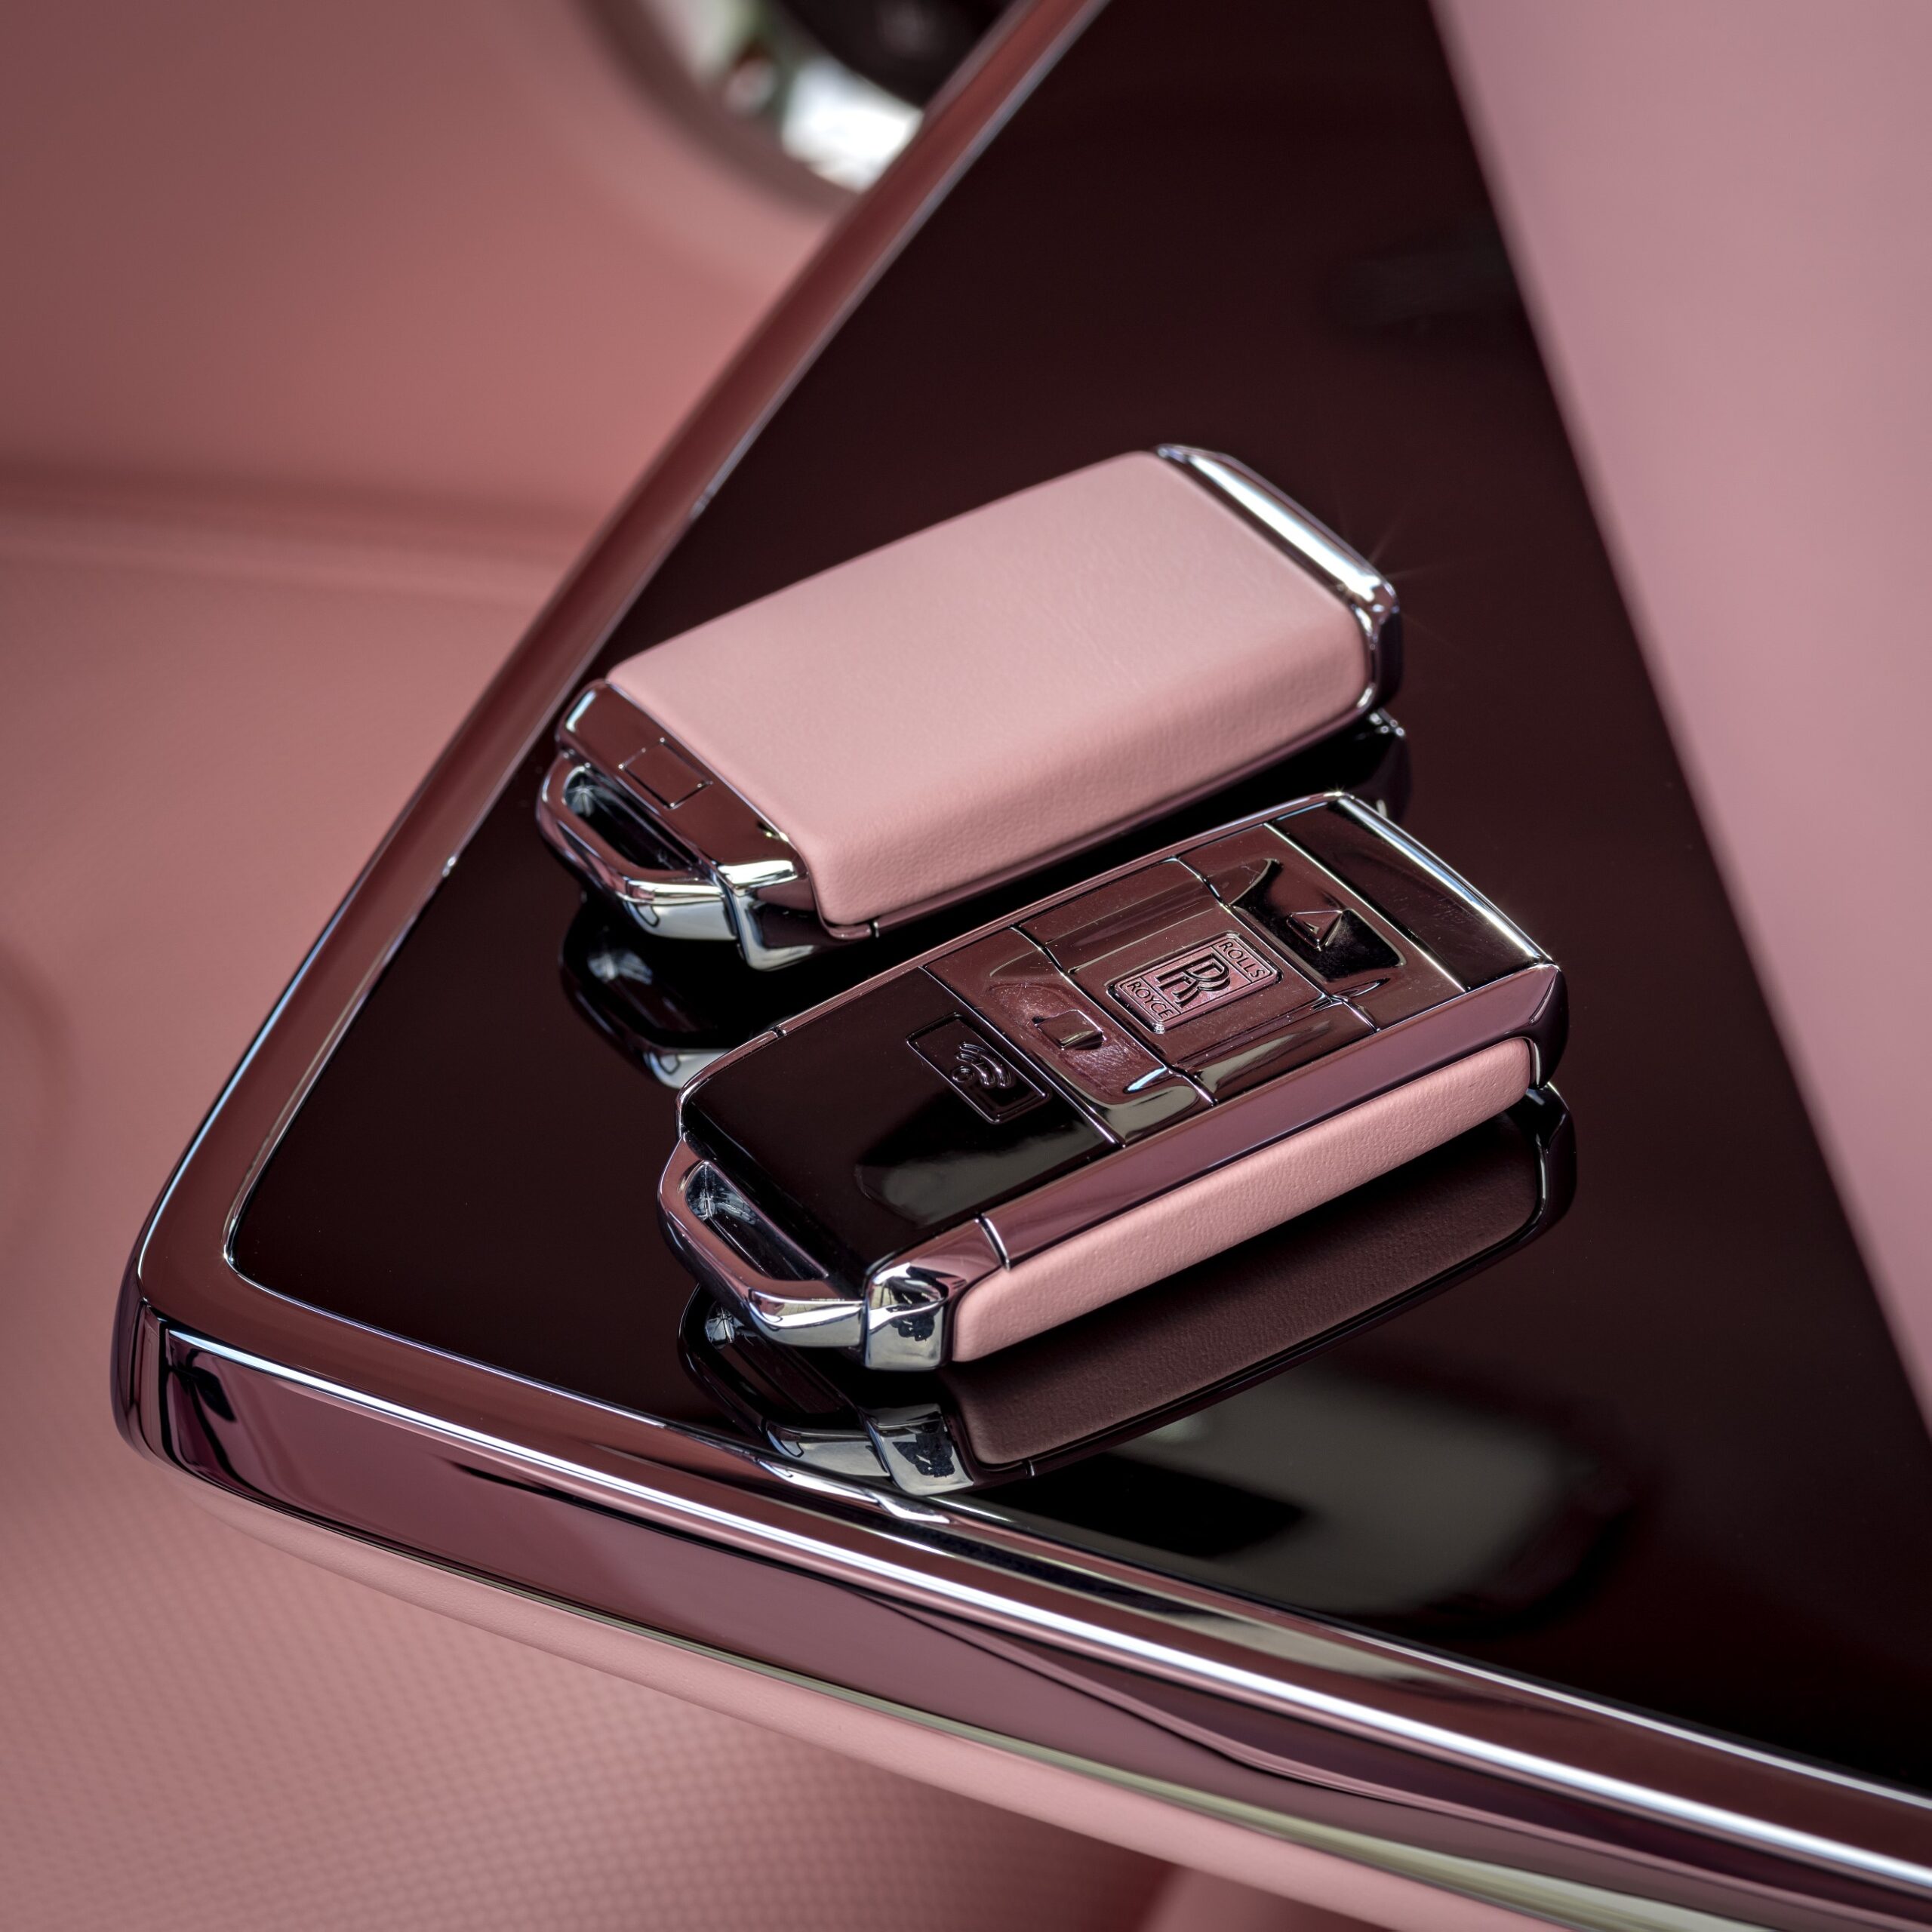 Rolls-Royce champagne rose just in time for mother's day via 360 MAGAZINE.